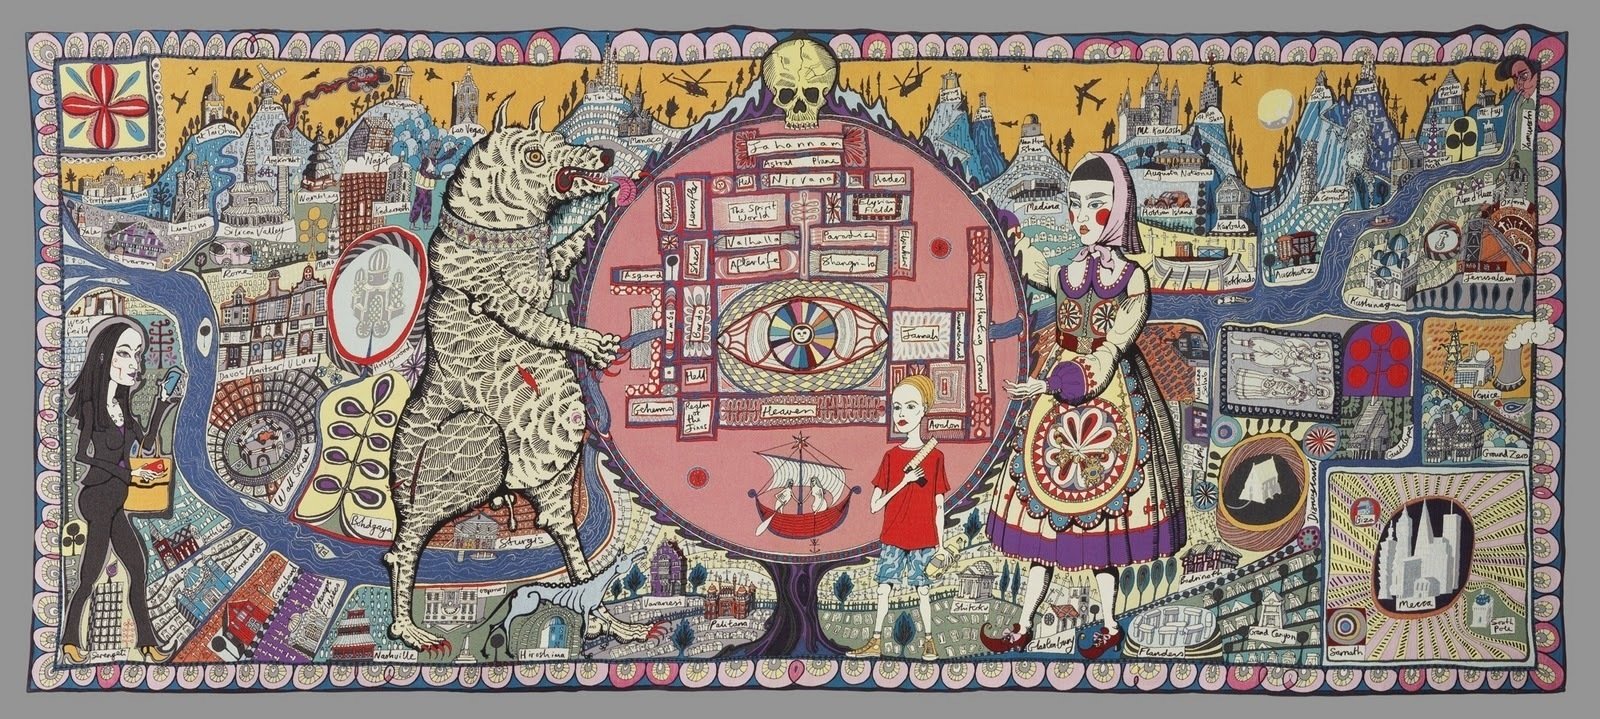 Grayson Perry, Map of Truths and Beliefs, 2011. Acrylic, wool and cotton tapestry, 290 х 690 cm. Courtesy of Grayson Perry.